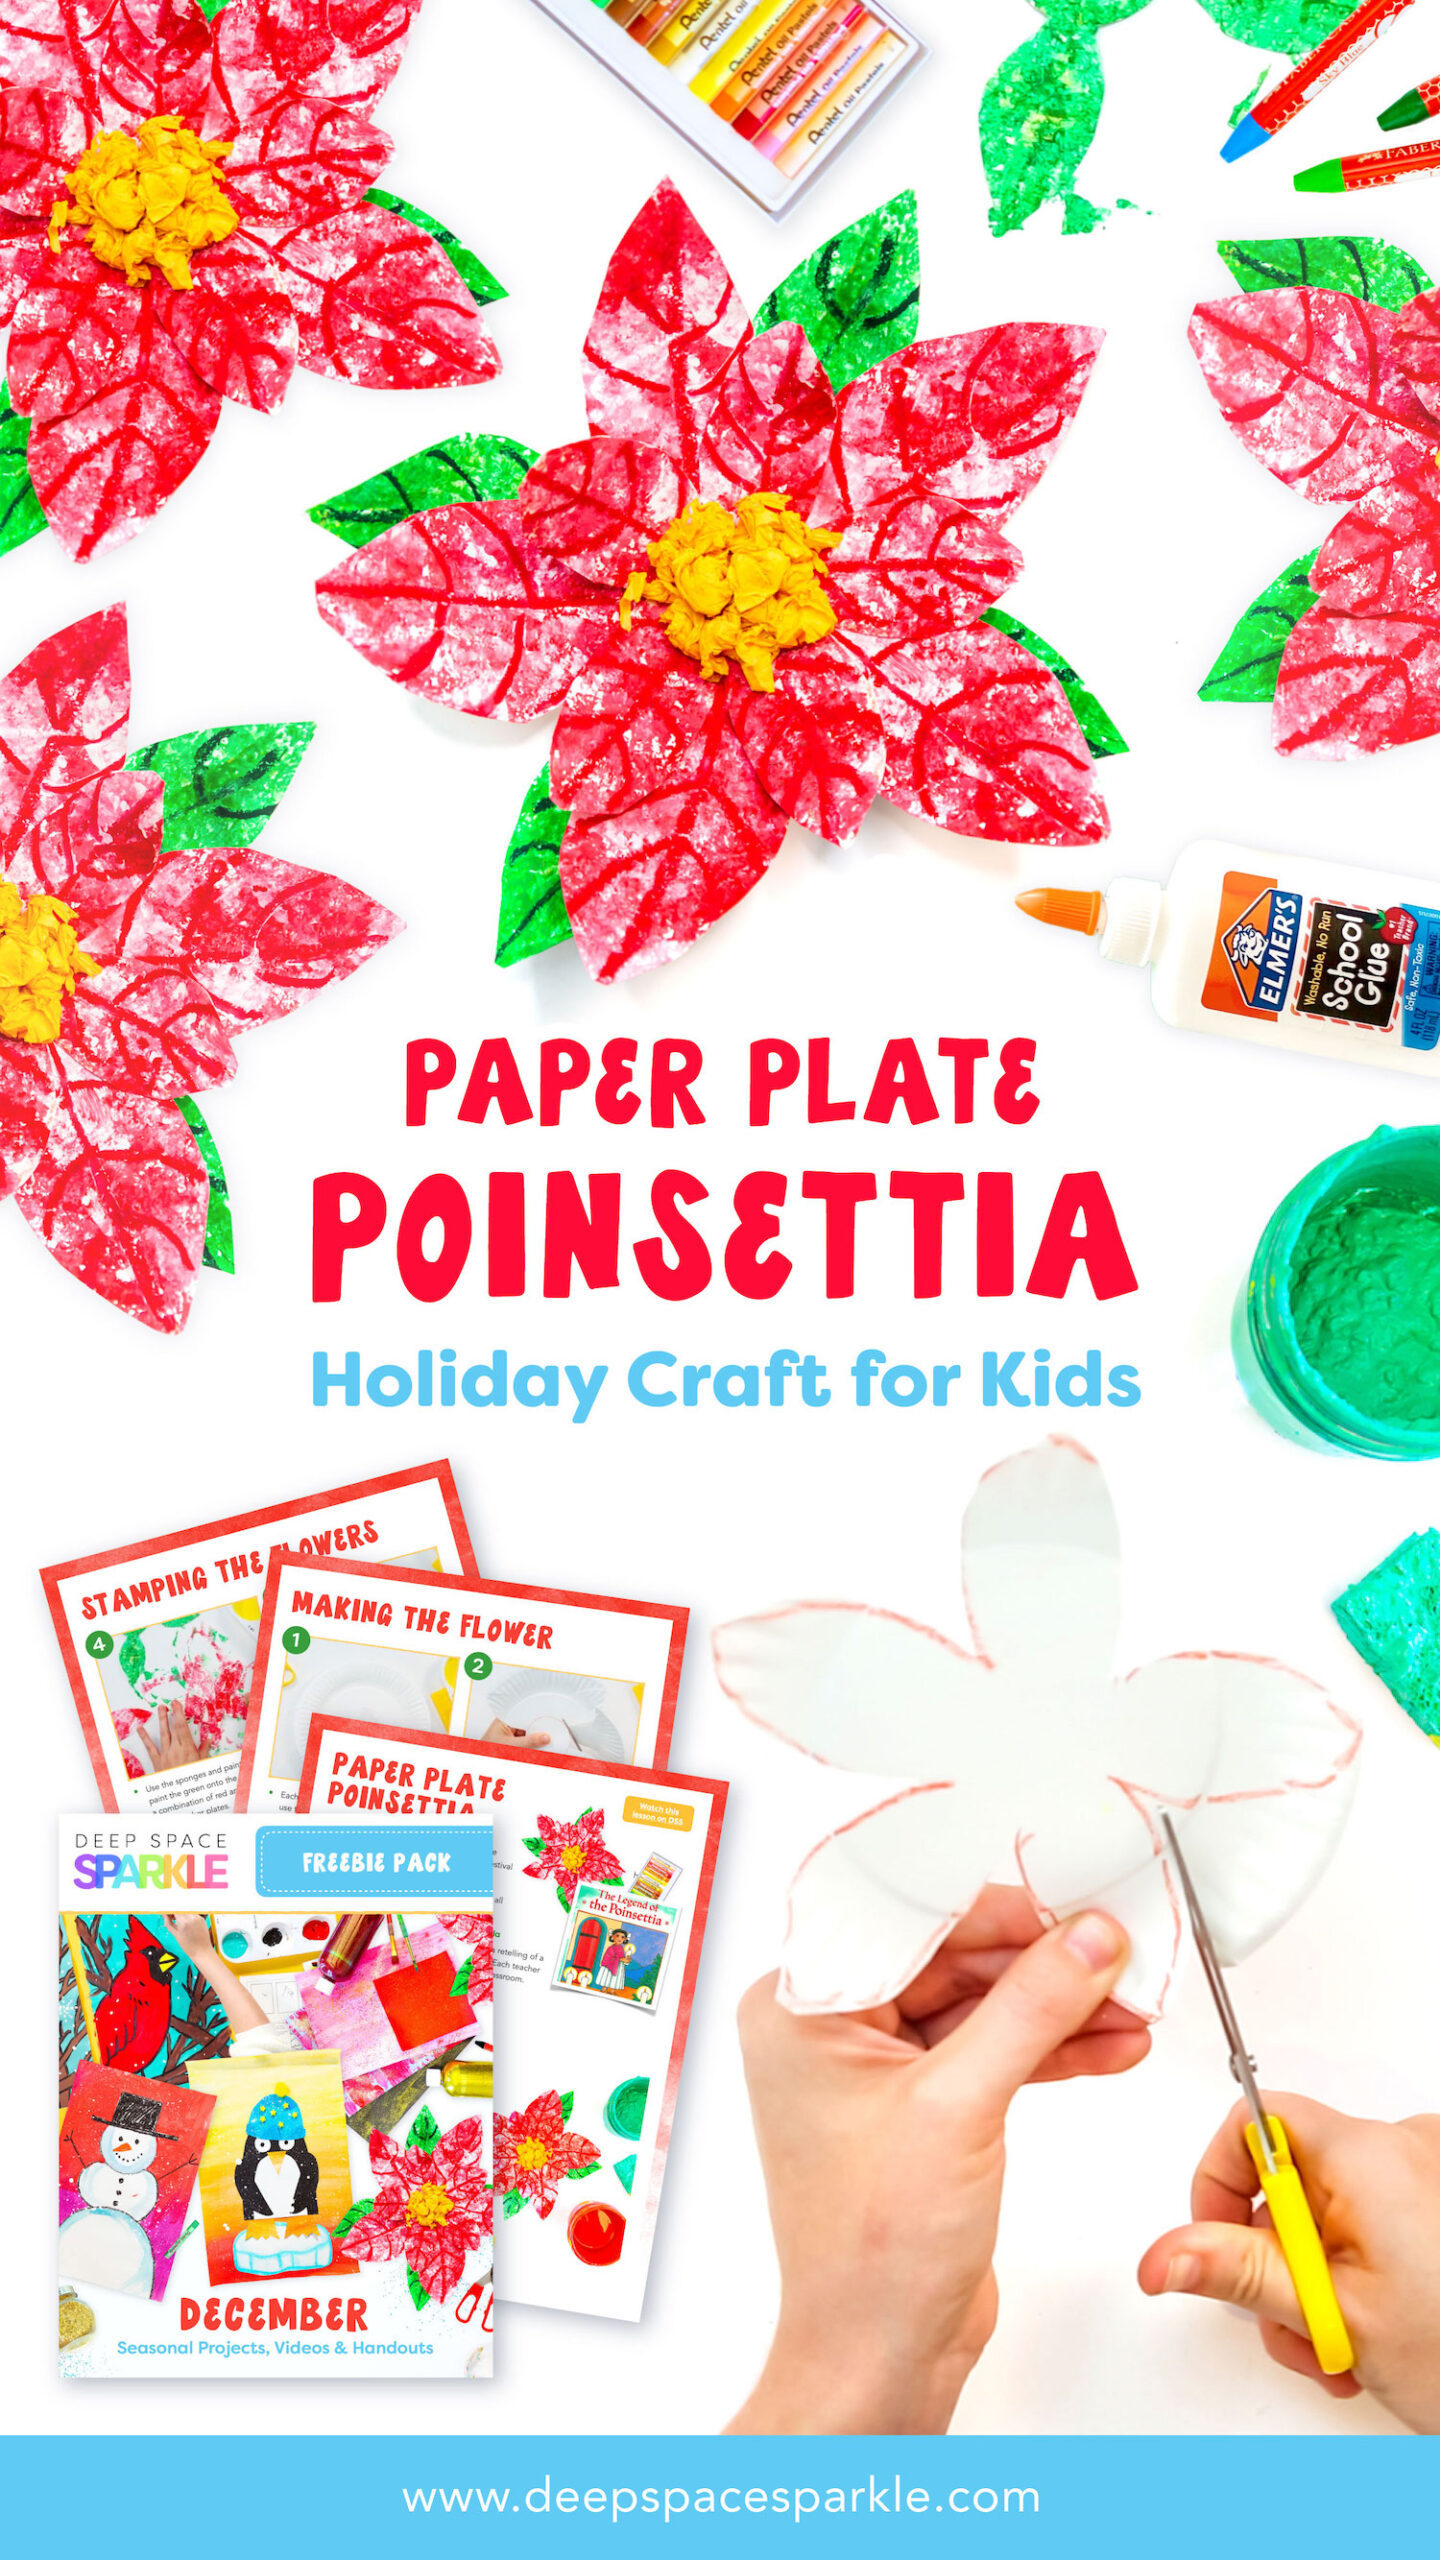 Paper Plate Poinsettia: Holiday Craft